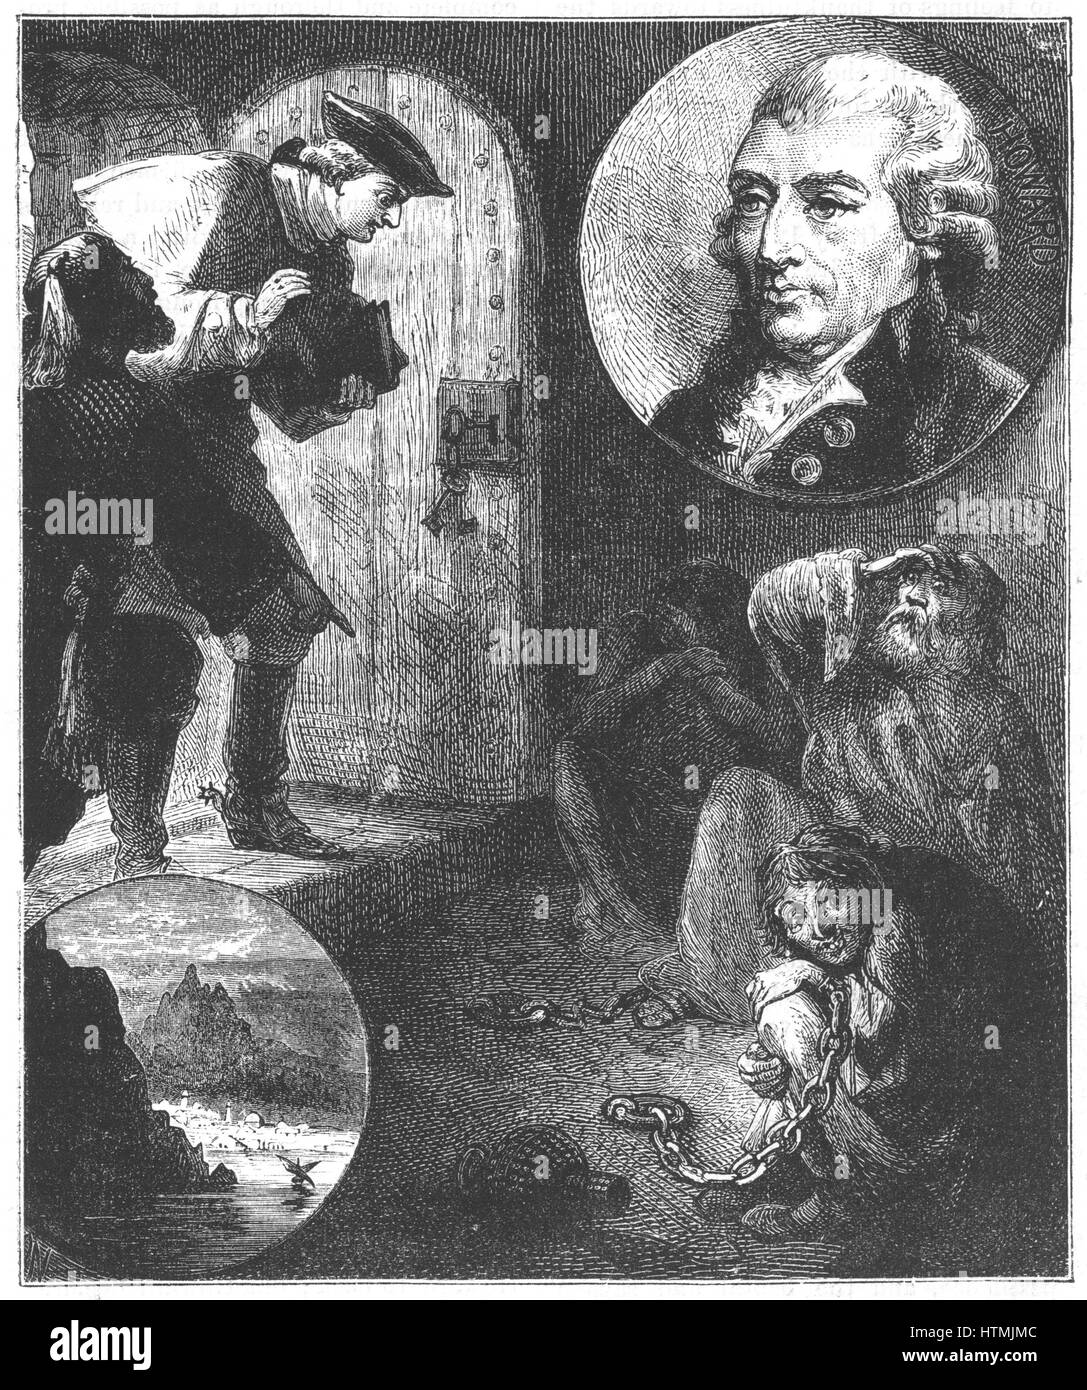 John Howard (1726-90) English prison reformer. From 1773 began campaign to improve awful conditions in English prisons. Published 'State if Prisons' in 1770. Howard visiting a prison and Howard portrait inset. Engraving 1880 Stock Photo